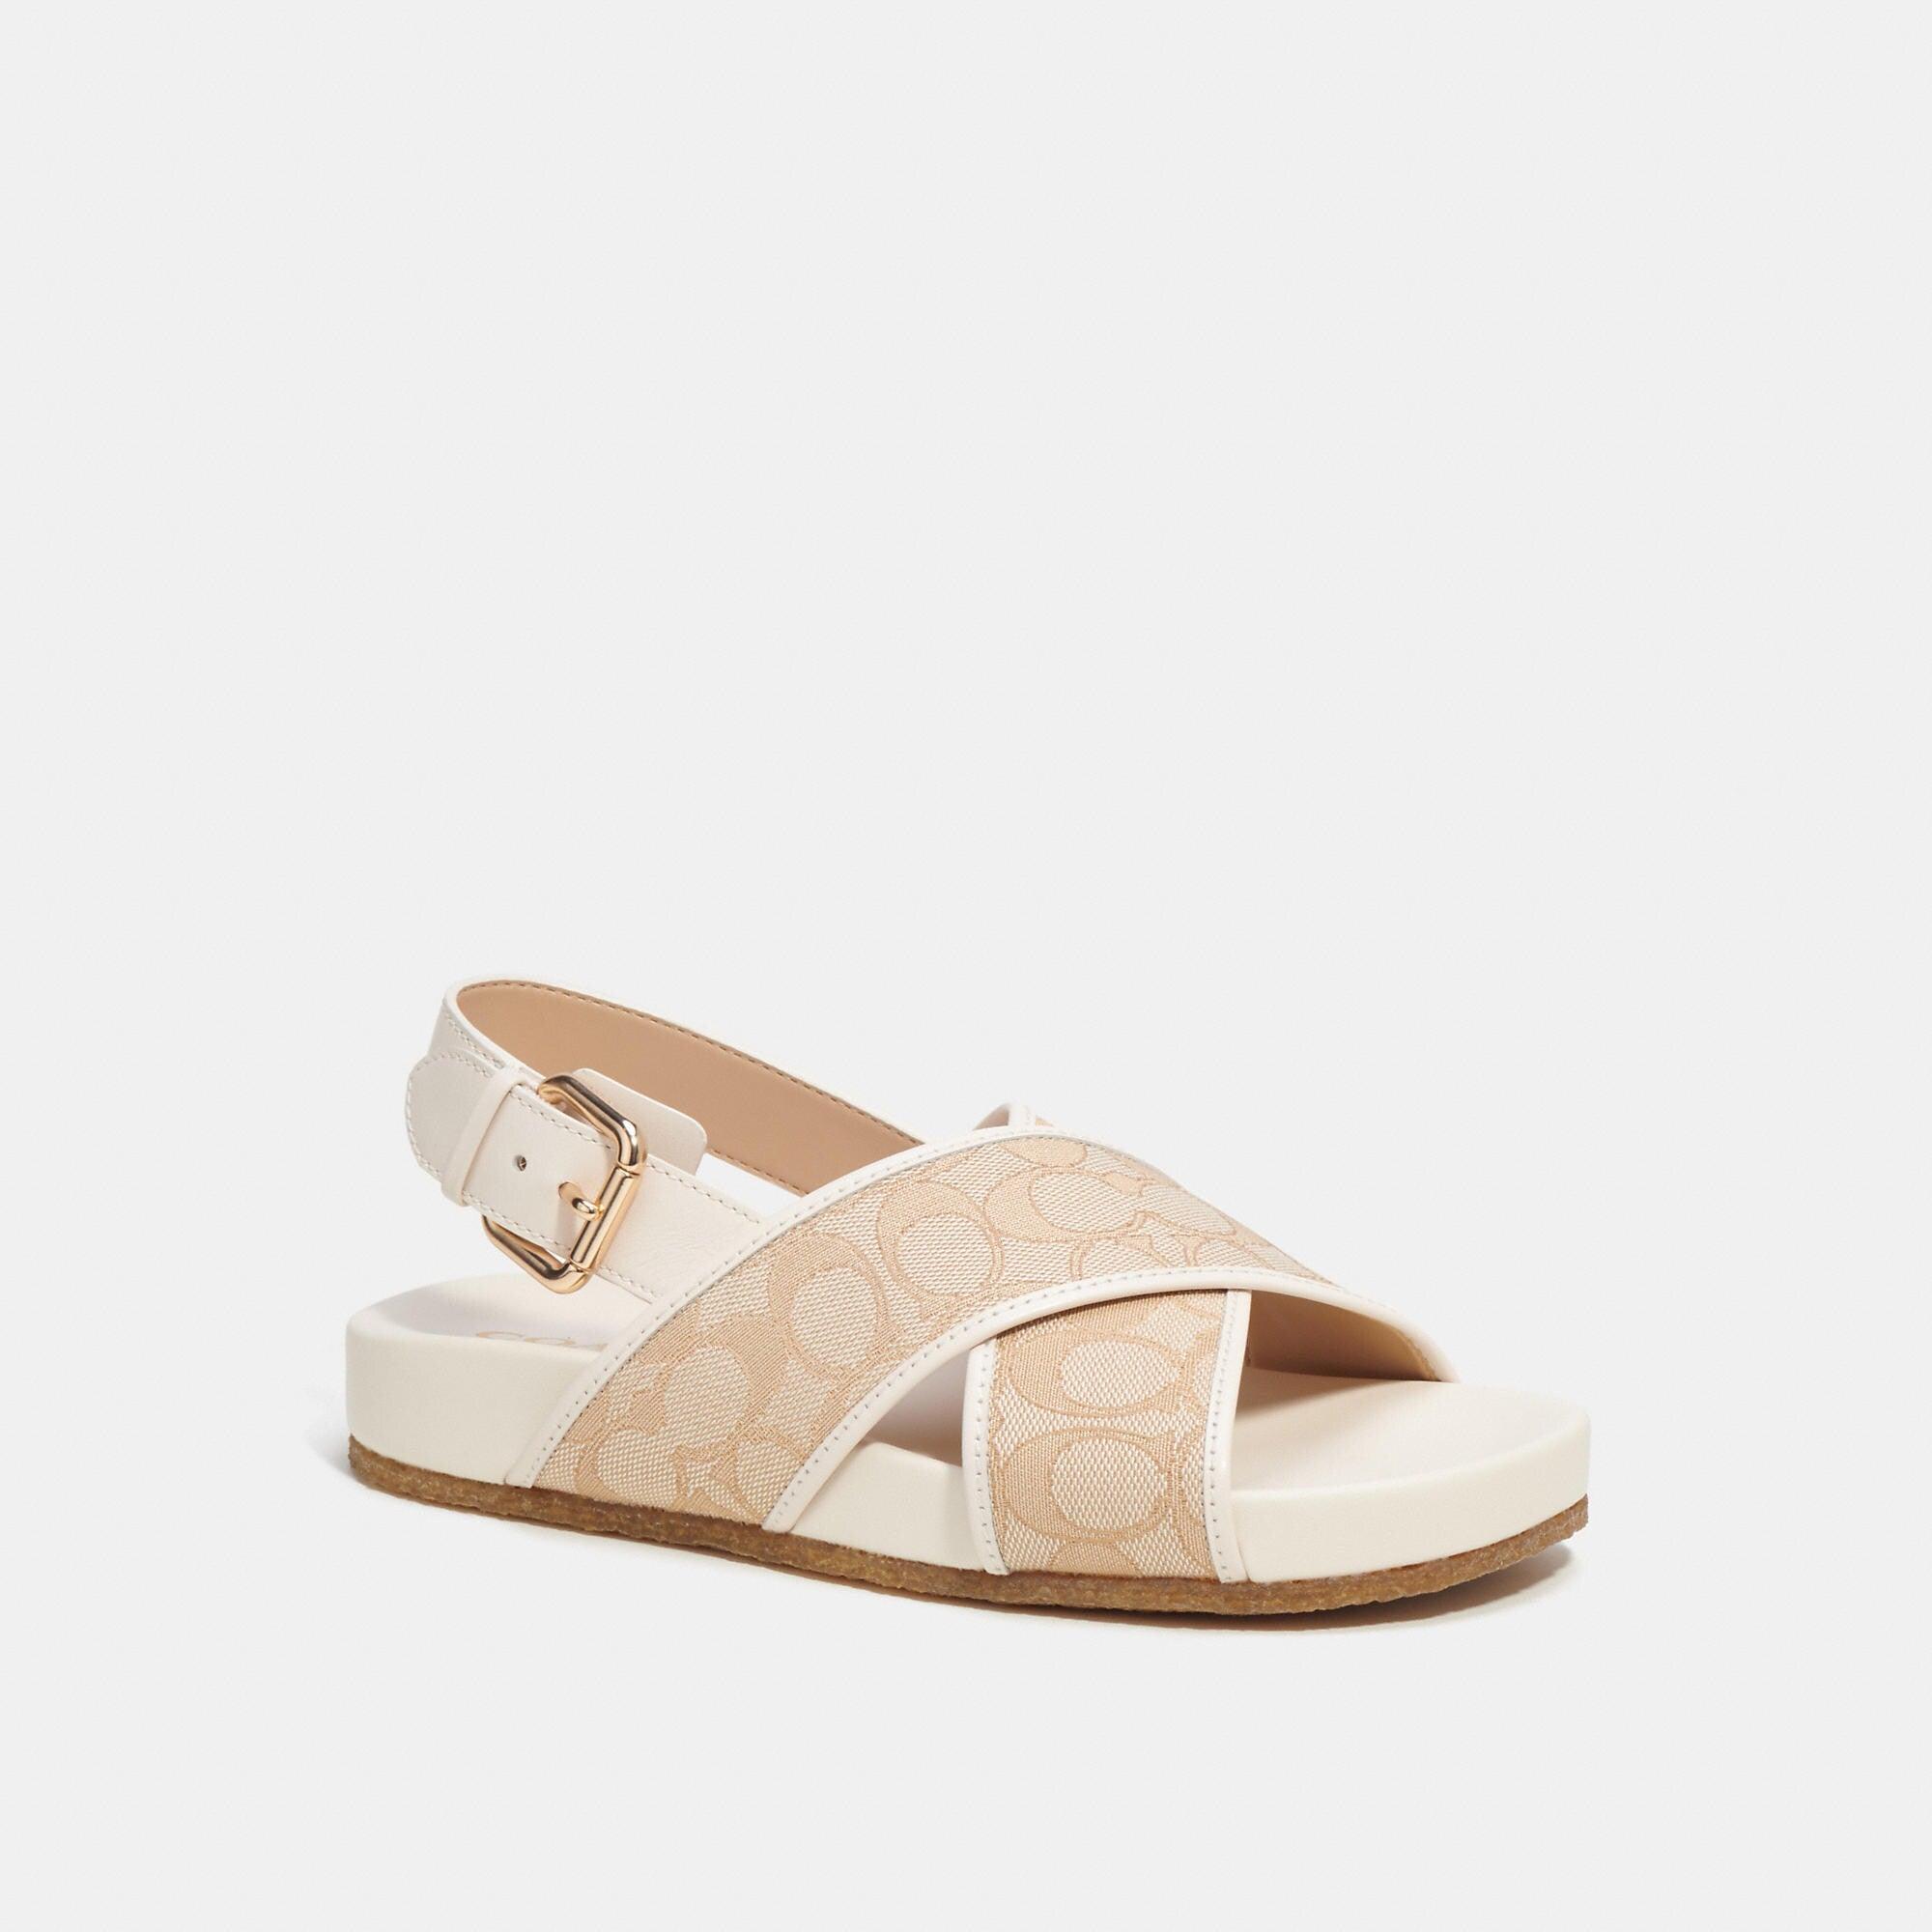 Coach Outlet Adora Sandal in Natural | Lyst